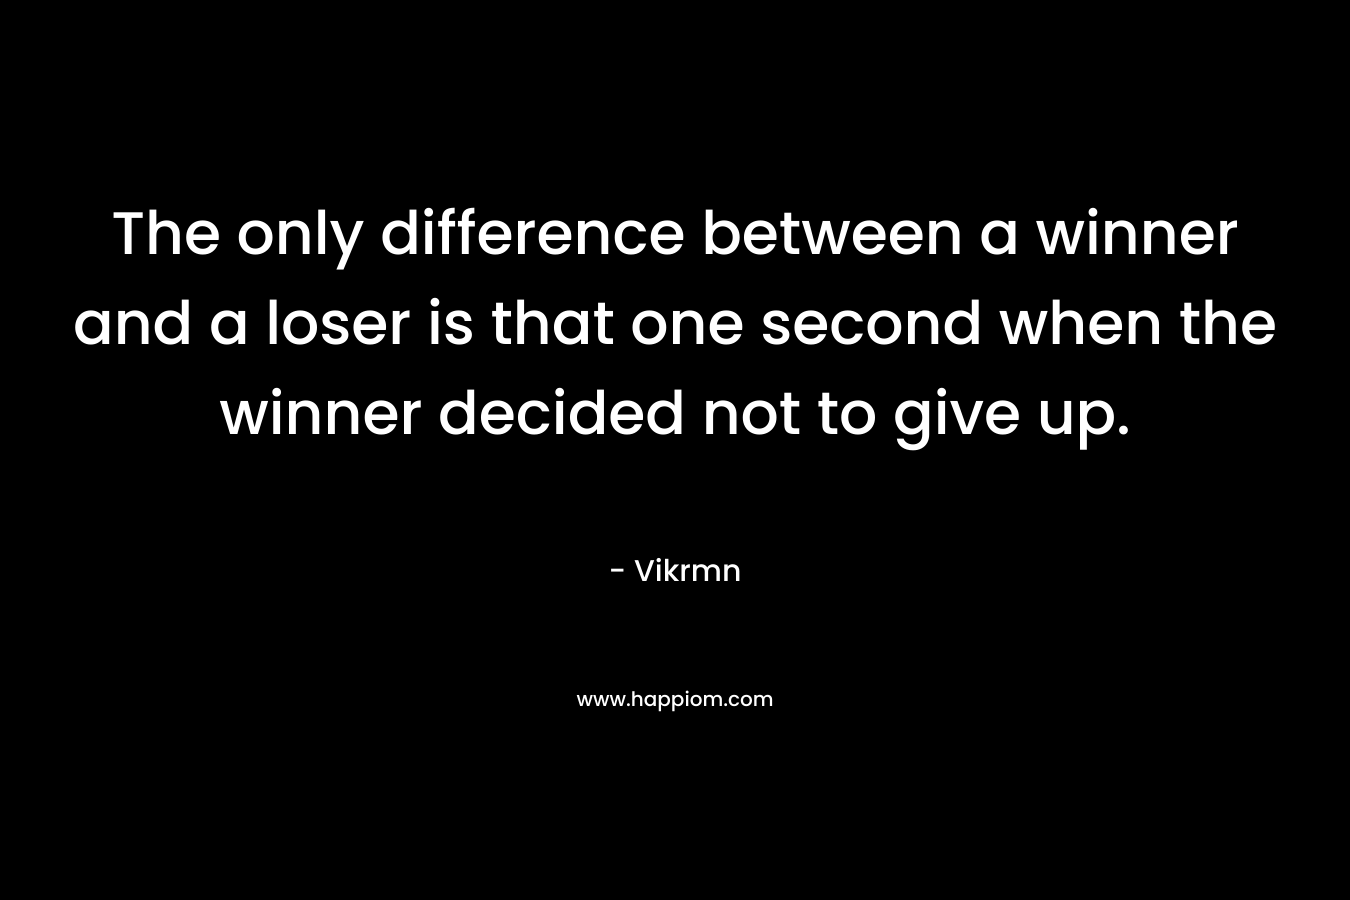 The only difference between a winner and a loser is that one second when the winner decided not to give up.